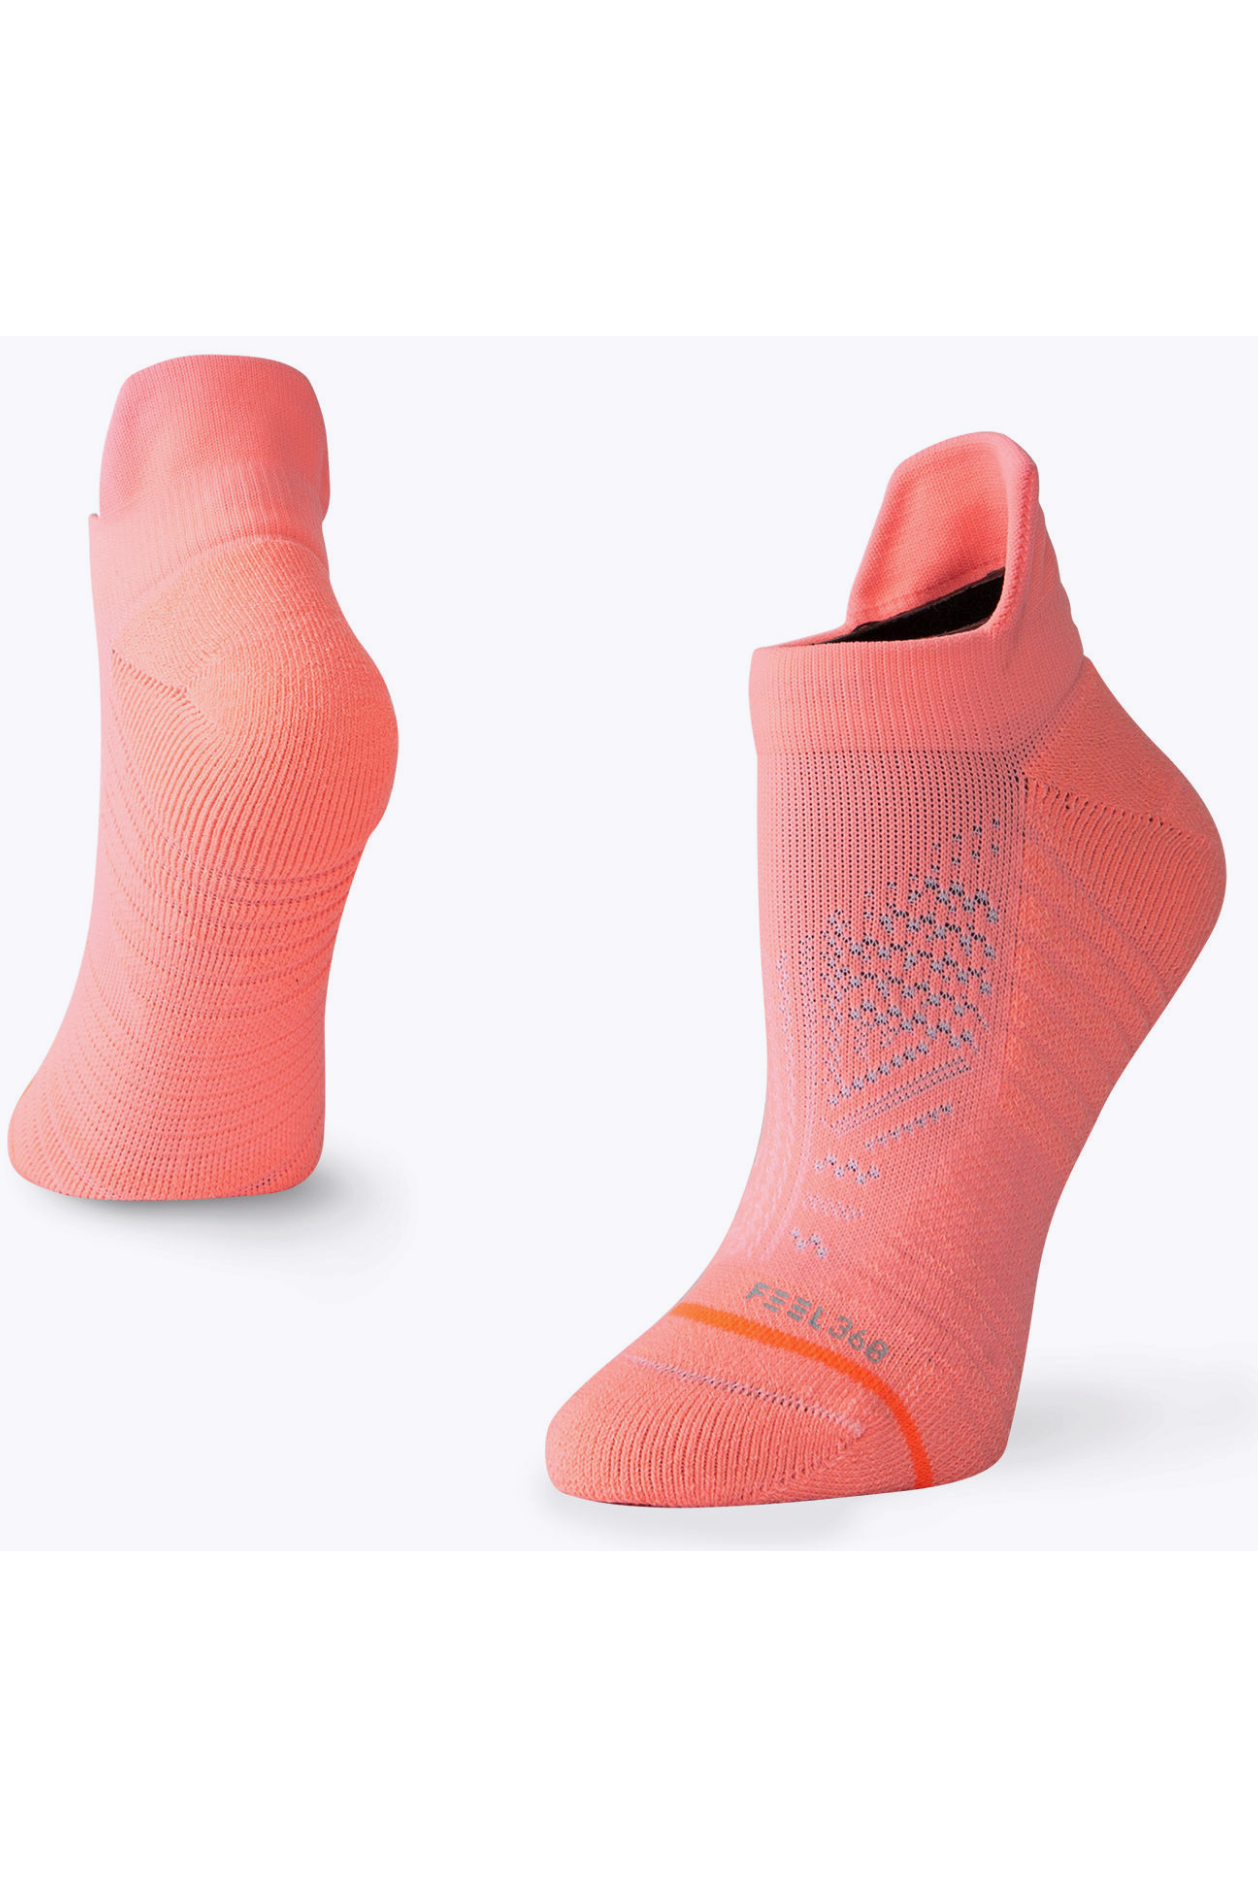 14 Pairs of Running Socks So Fancy Theyre Basically Fitspiration